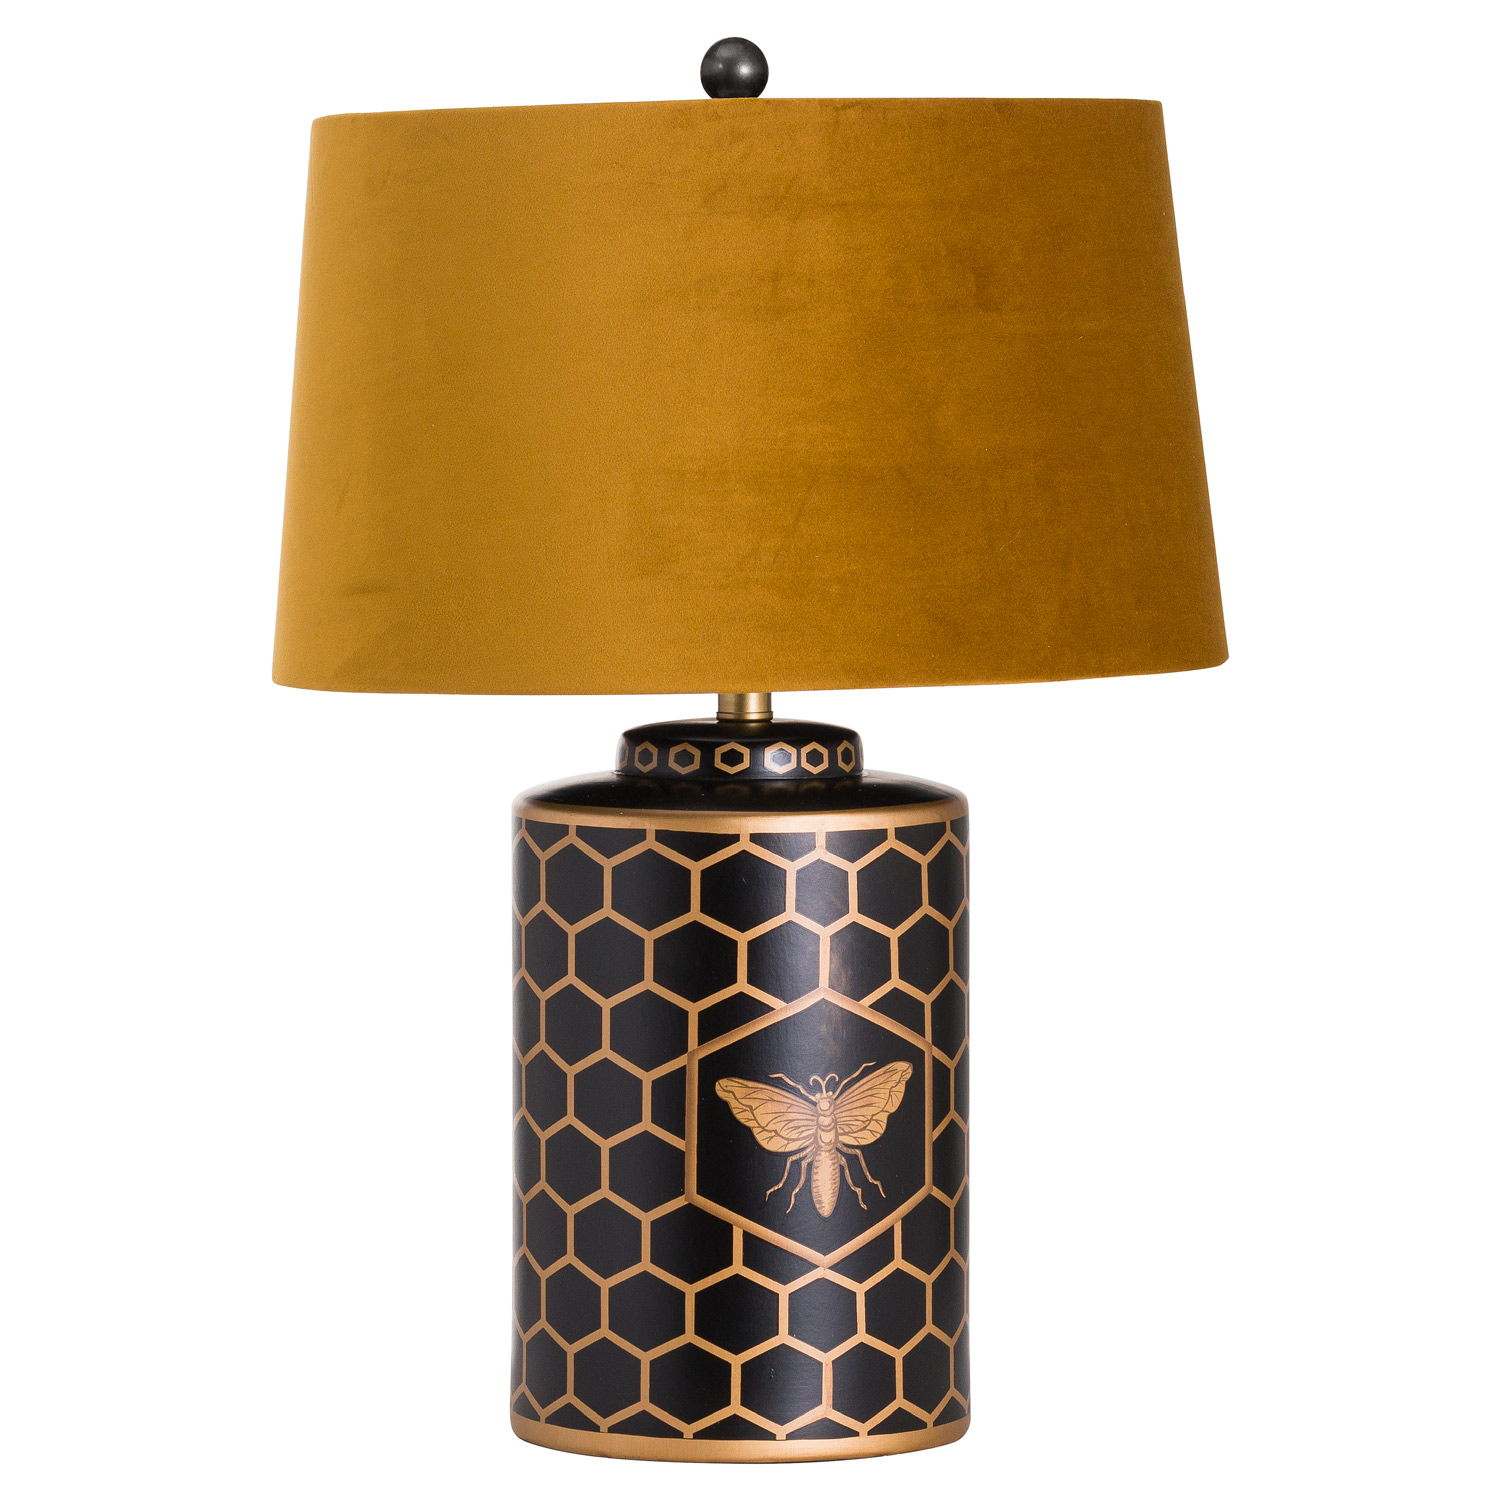 Harlow Bee Table Lamp With Mustard Shade - Image 1